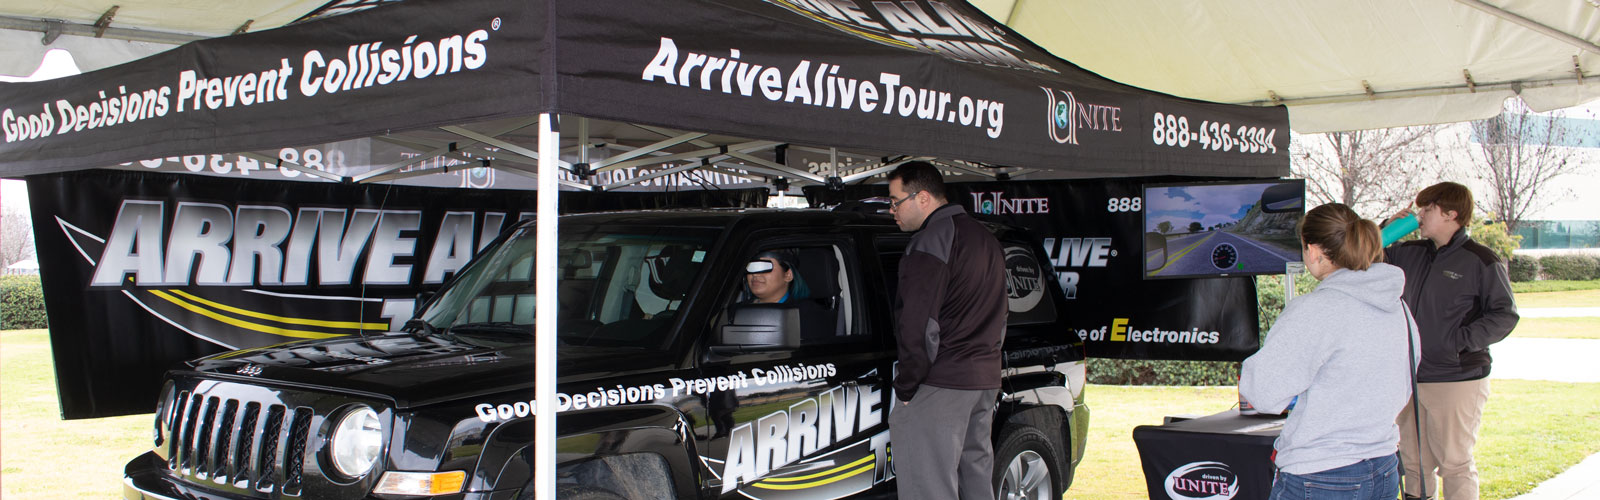 Arrive Alive tour bus on campus at CCC